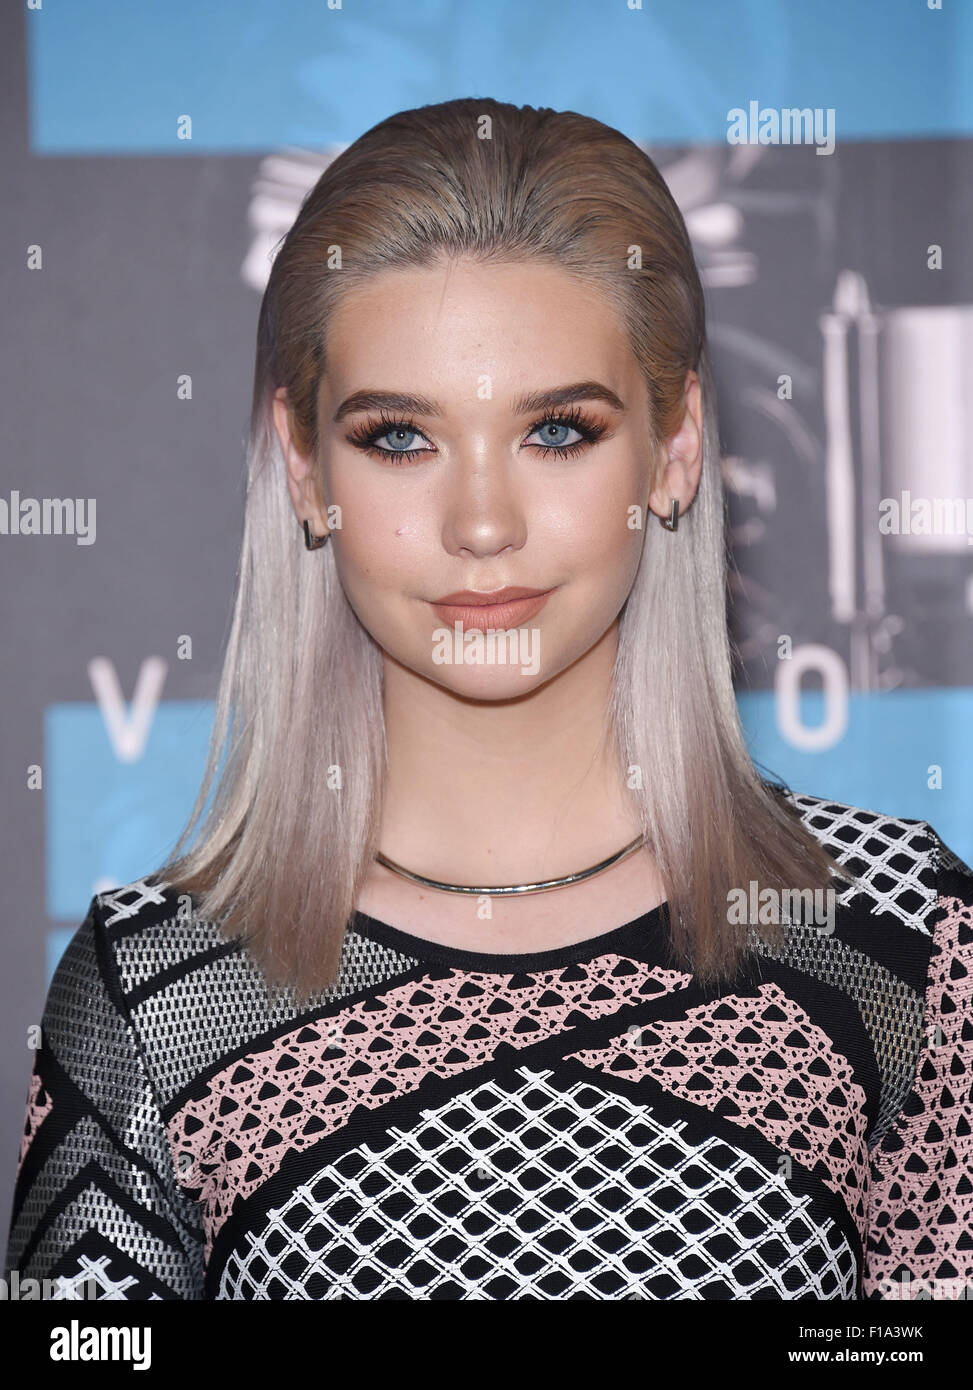 Los Angeles, California, USA. 30th Aug, 2015. Amanda Steele arrives for the  2015 MTV Video Music Awards at the Microsoft theater. Credit: Lisa  O'Connor/ZUMA Wire/Alamy Live News Stock Photo - Alamy